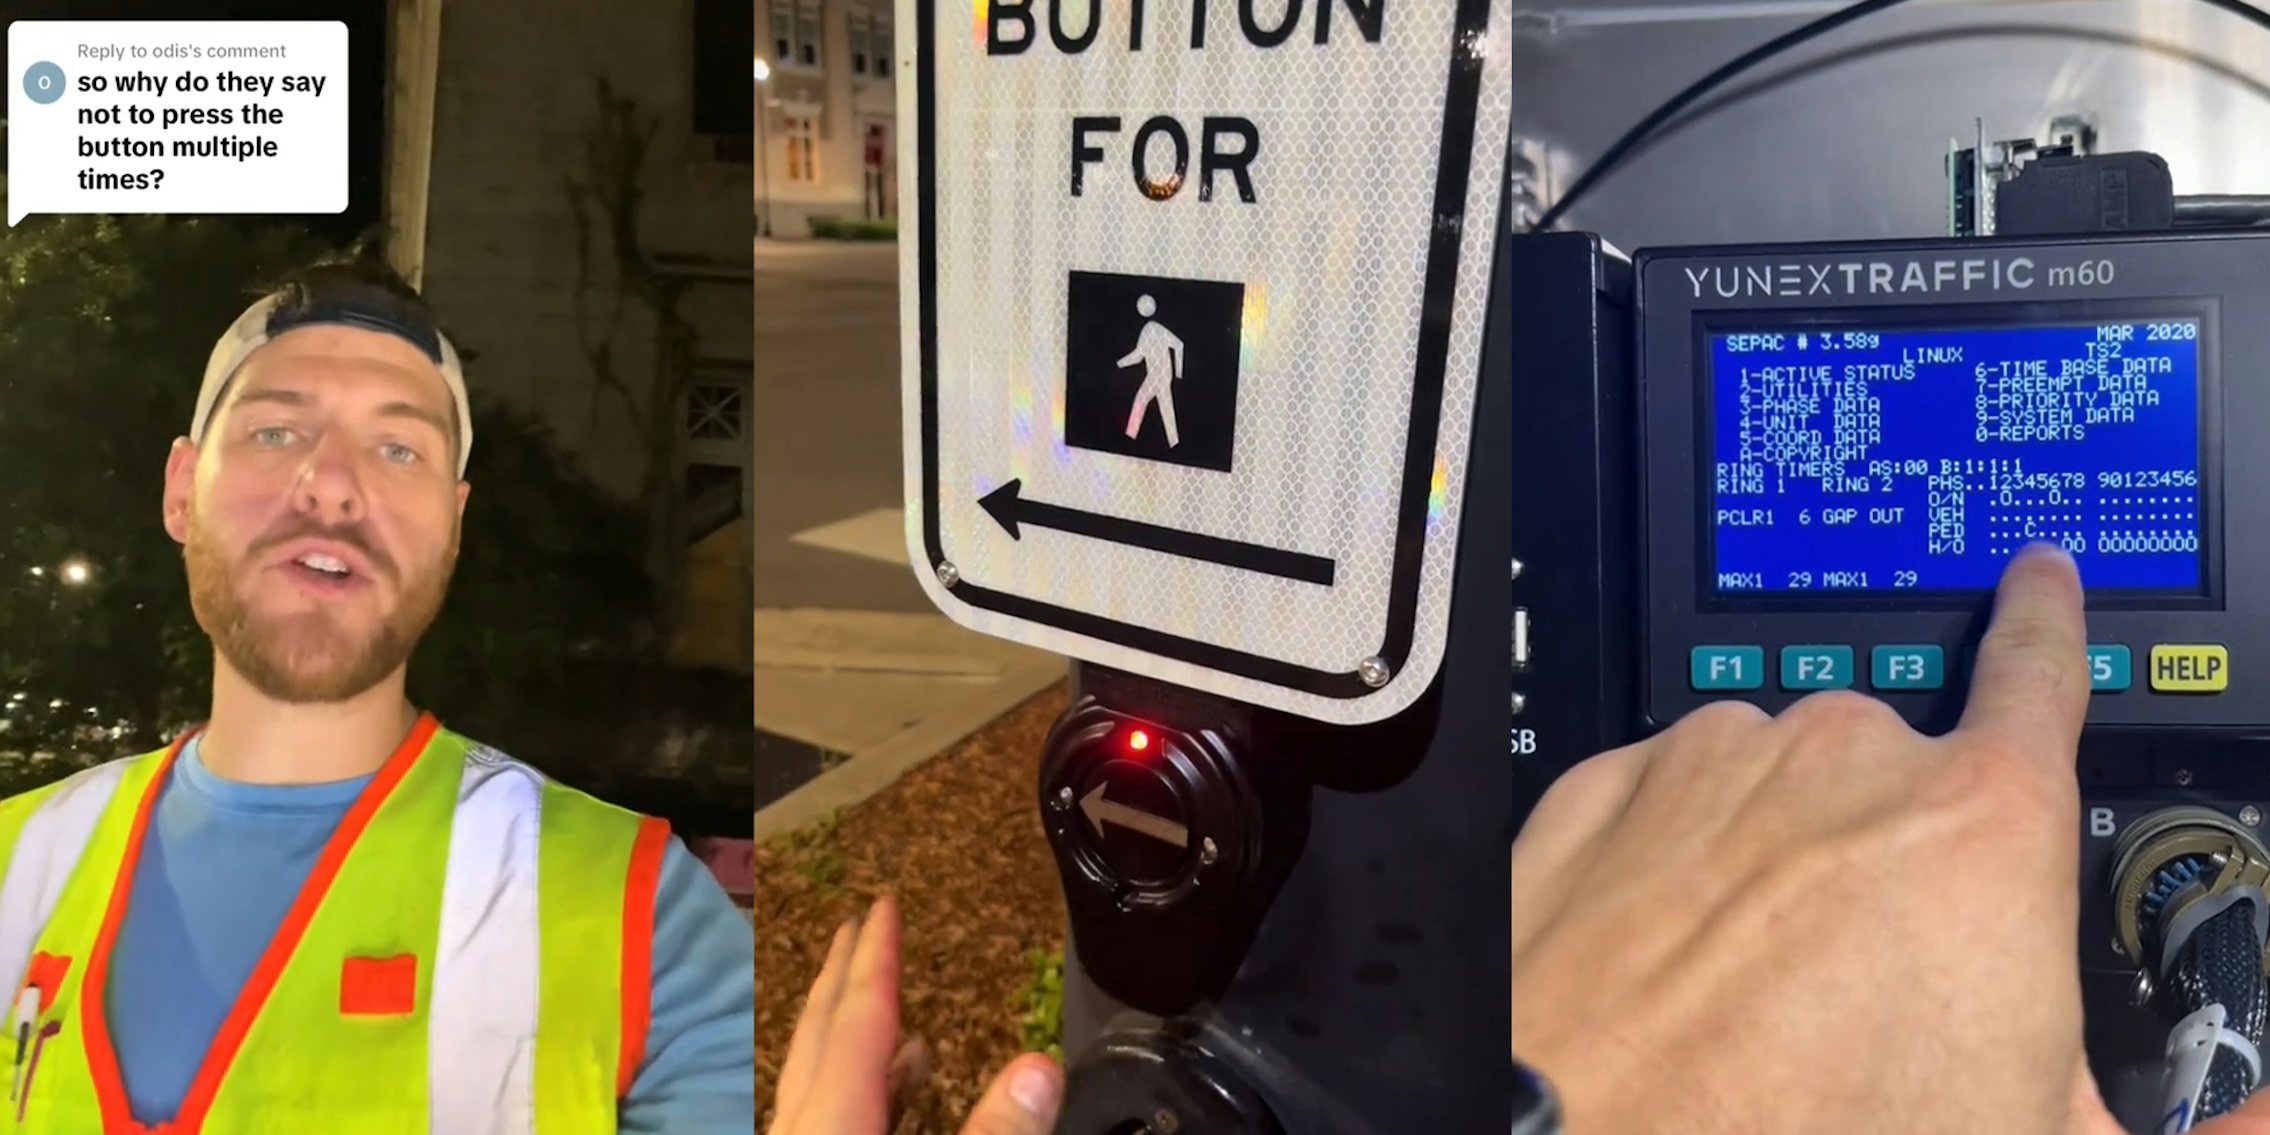 Traffic light expert shares why you shouldn't press pedestrian button multiple times